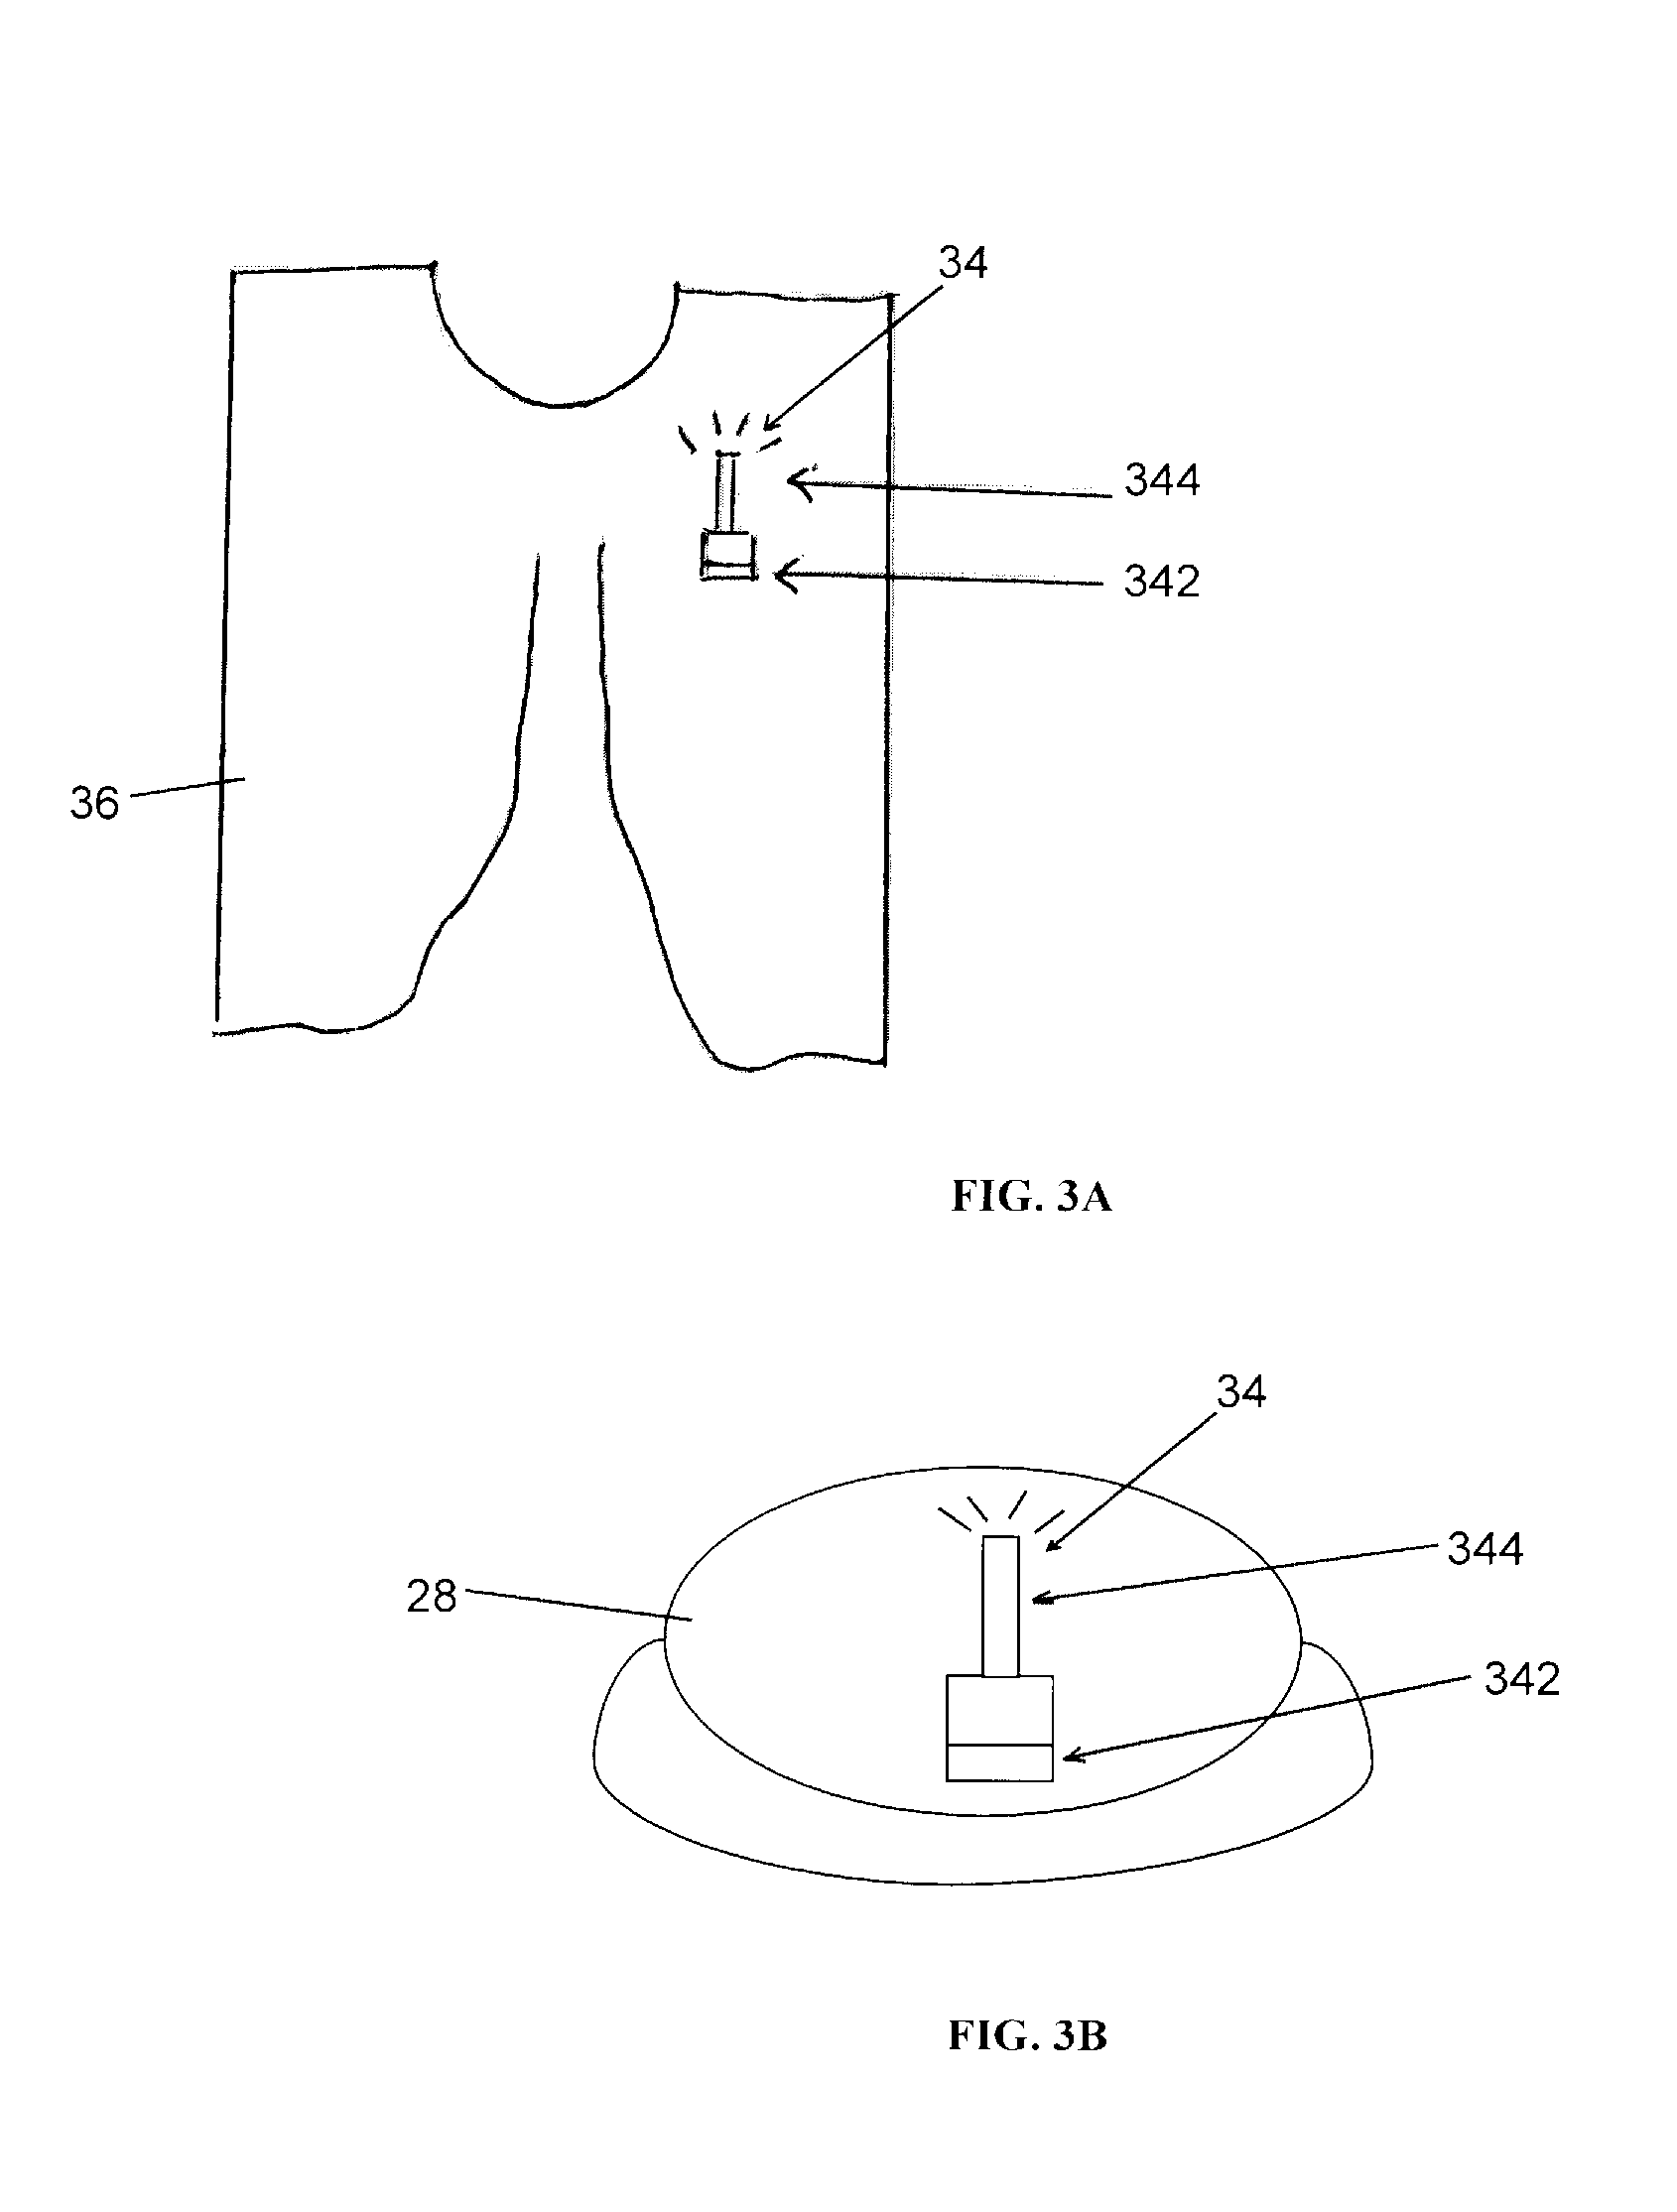 Method and apparatus for safety protocol verification, control and management